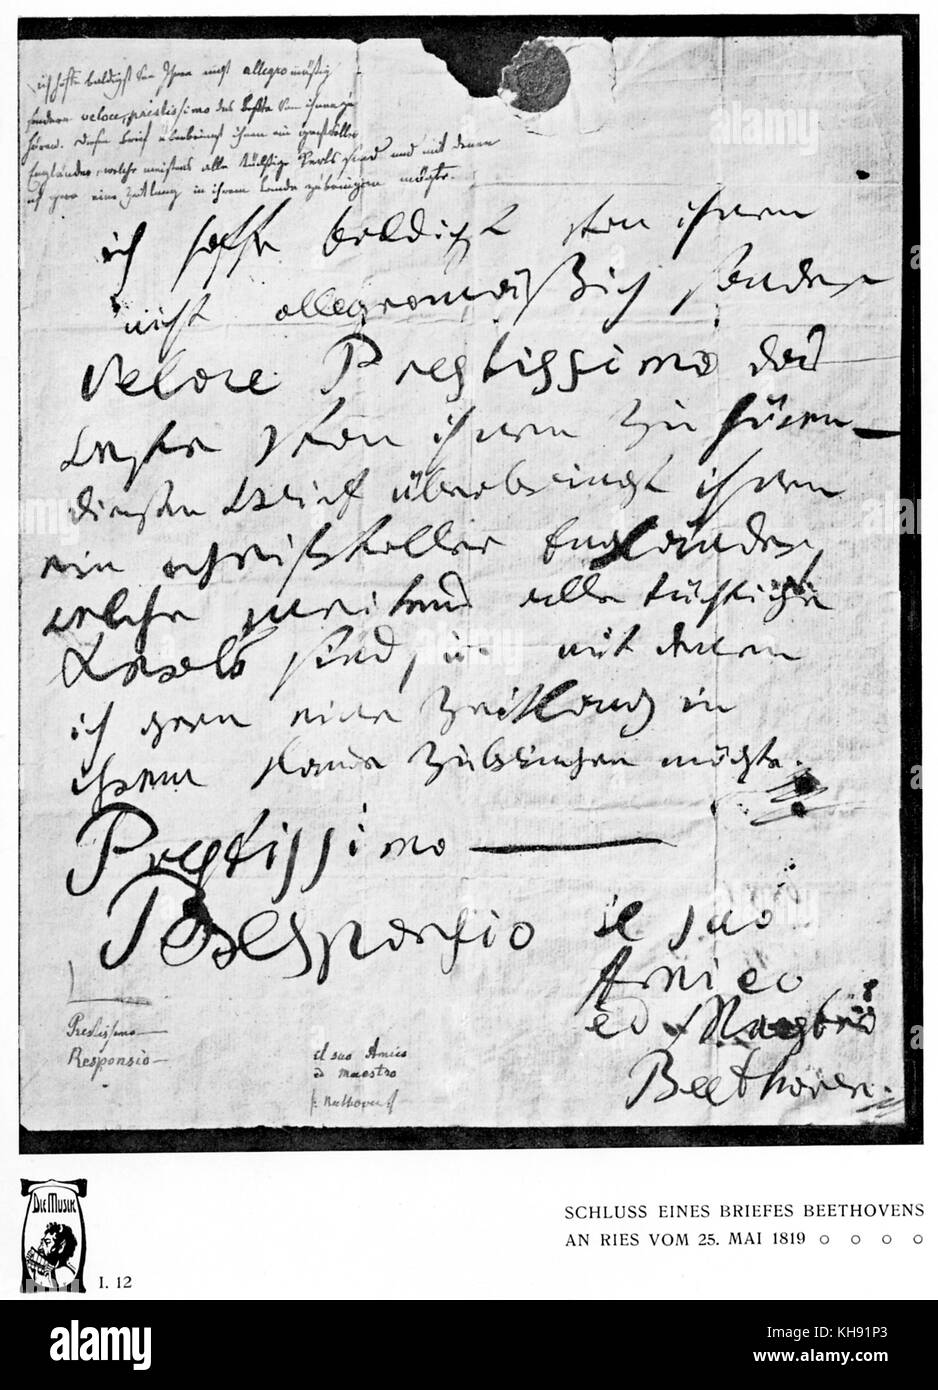 Ludwig van Beethoven 's letter to Ferdinand Ries from 25 May 1819.  End of letter. LVB: German composer, 17 December  1770- 26 March 1827. FR: German composer who worked as Beethoven's secretary and copyist. baptised 28 November 1784 - 13 January 1838. Stock Photo